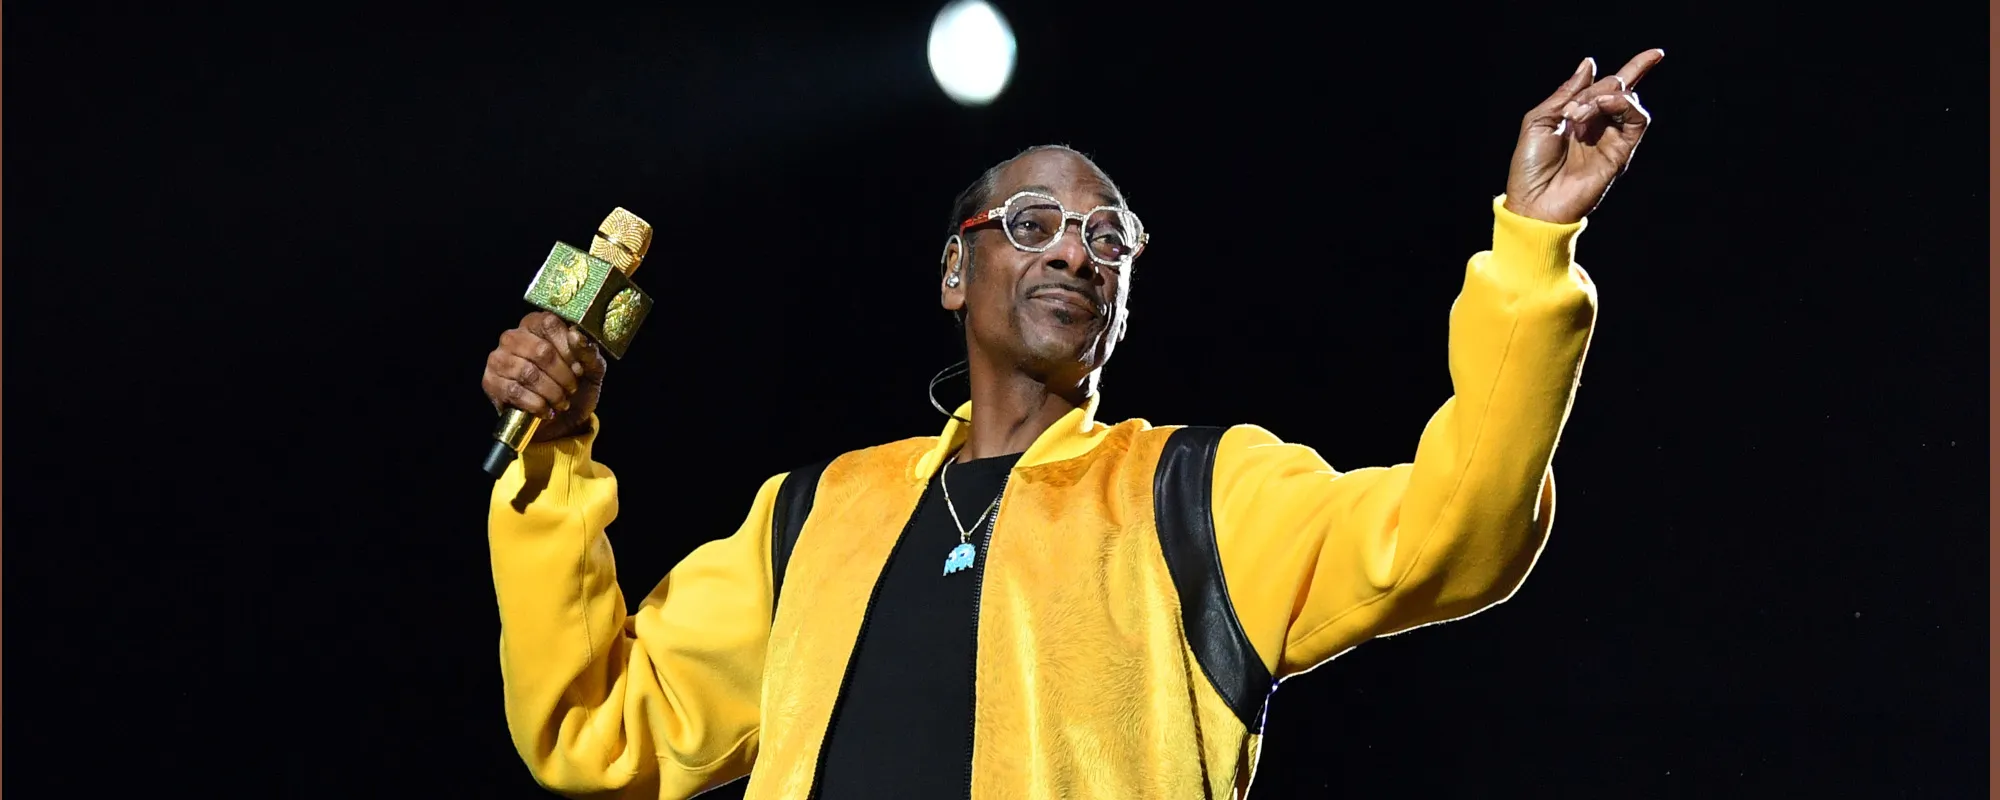 Snoop Dogg Responds to AI-Mashup of “Gin and Juice” and “The Bare Necessities”